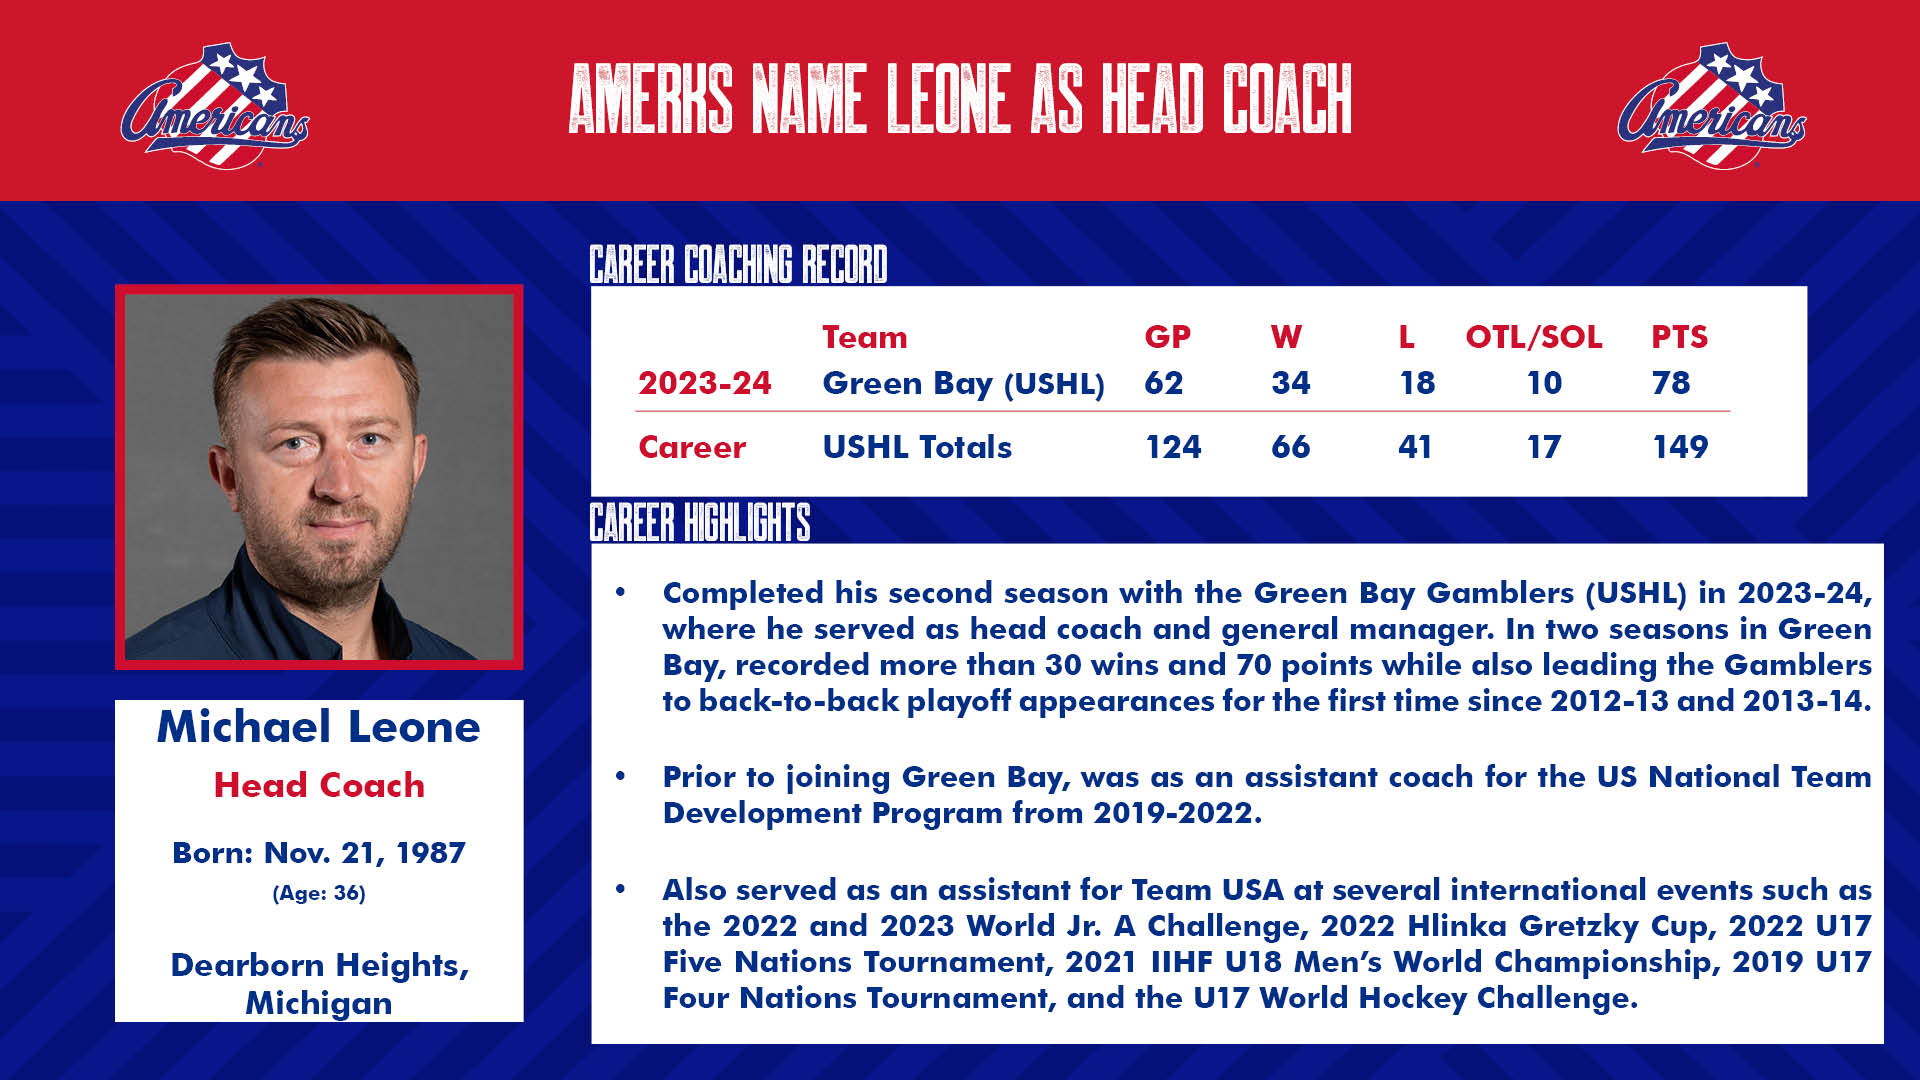 MICHAEL LEONE NAMED HEAD COACH OF THE ROCHESTER AMERICANS | Rochester ...